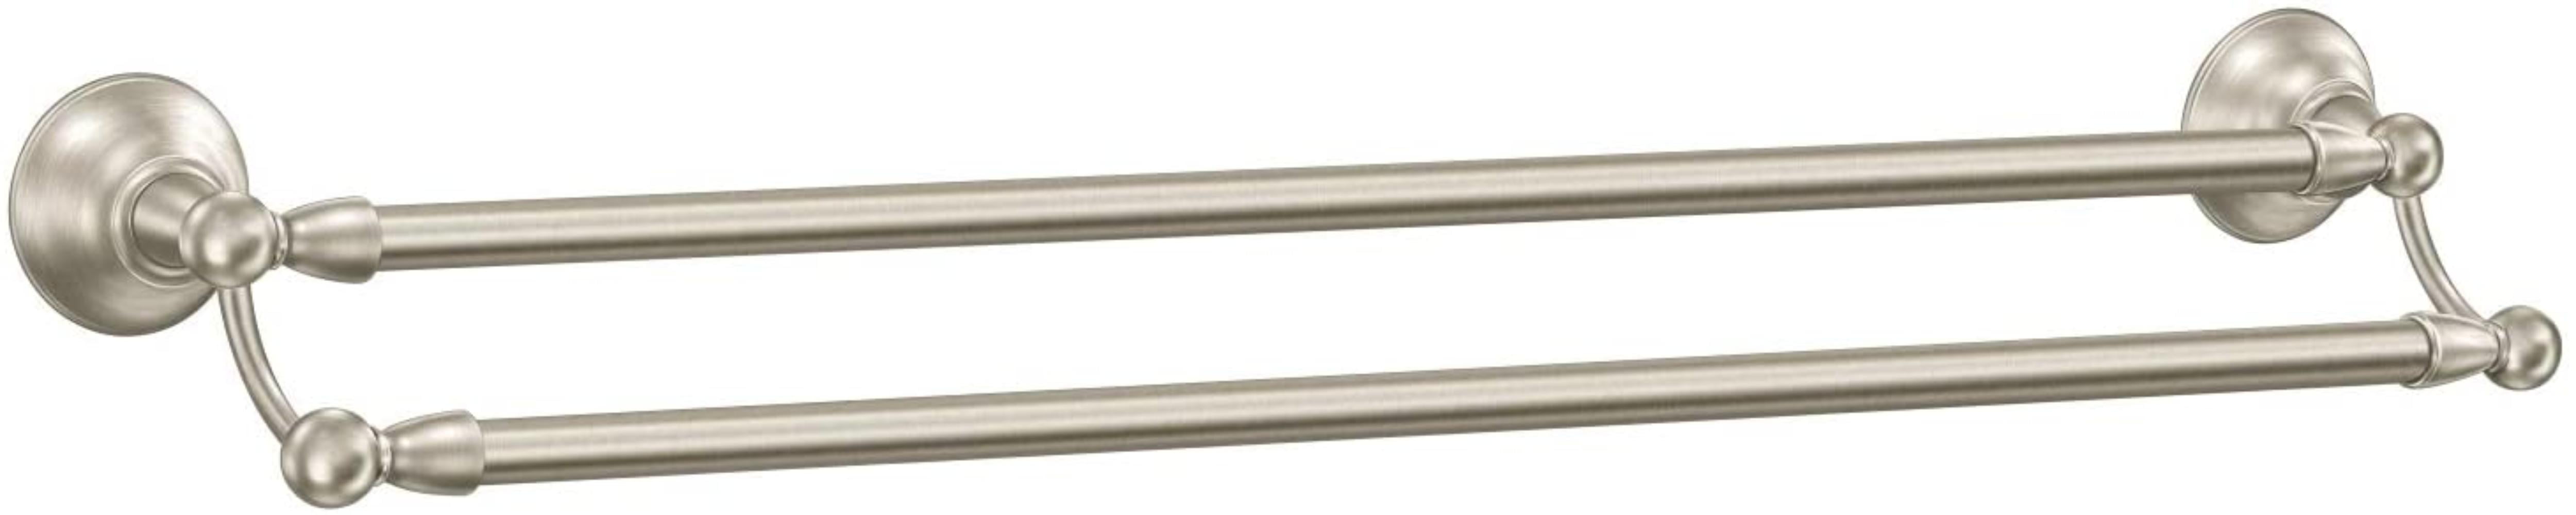 DN6822BN Sage Collection 24-Inch Double Towel Bar, Spot Resist 